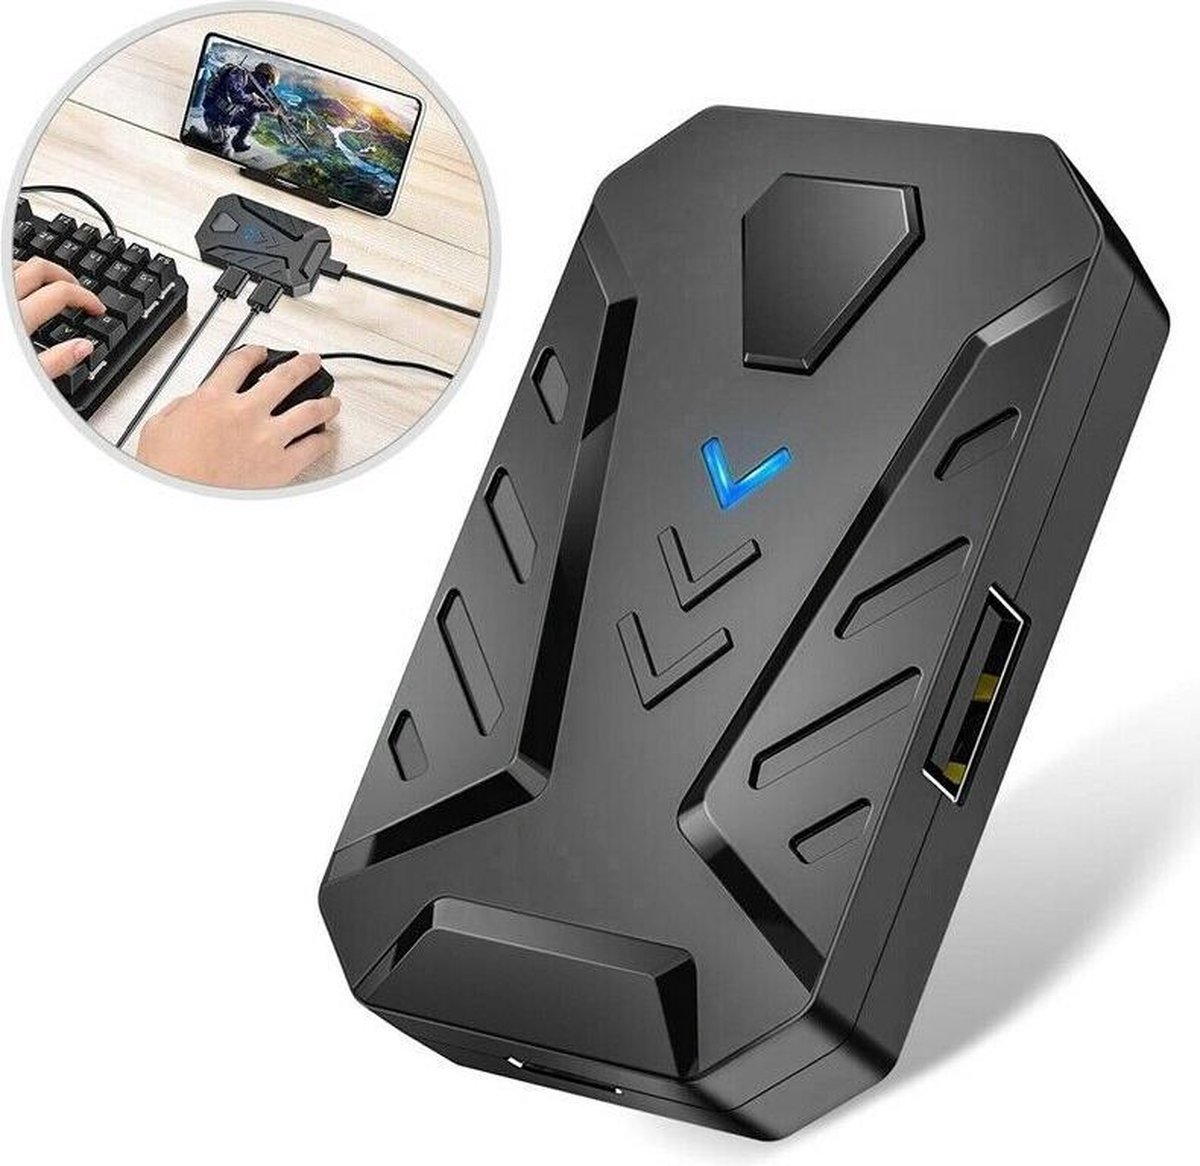 PUBG Game Converter MIX Toetsenbord Muis usb Converter Bluetooth Station Stand Docking voor Iphone Android Telefoon & smartphone